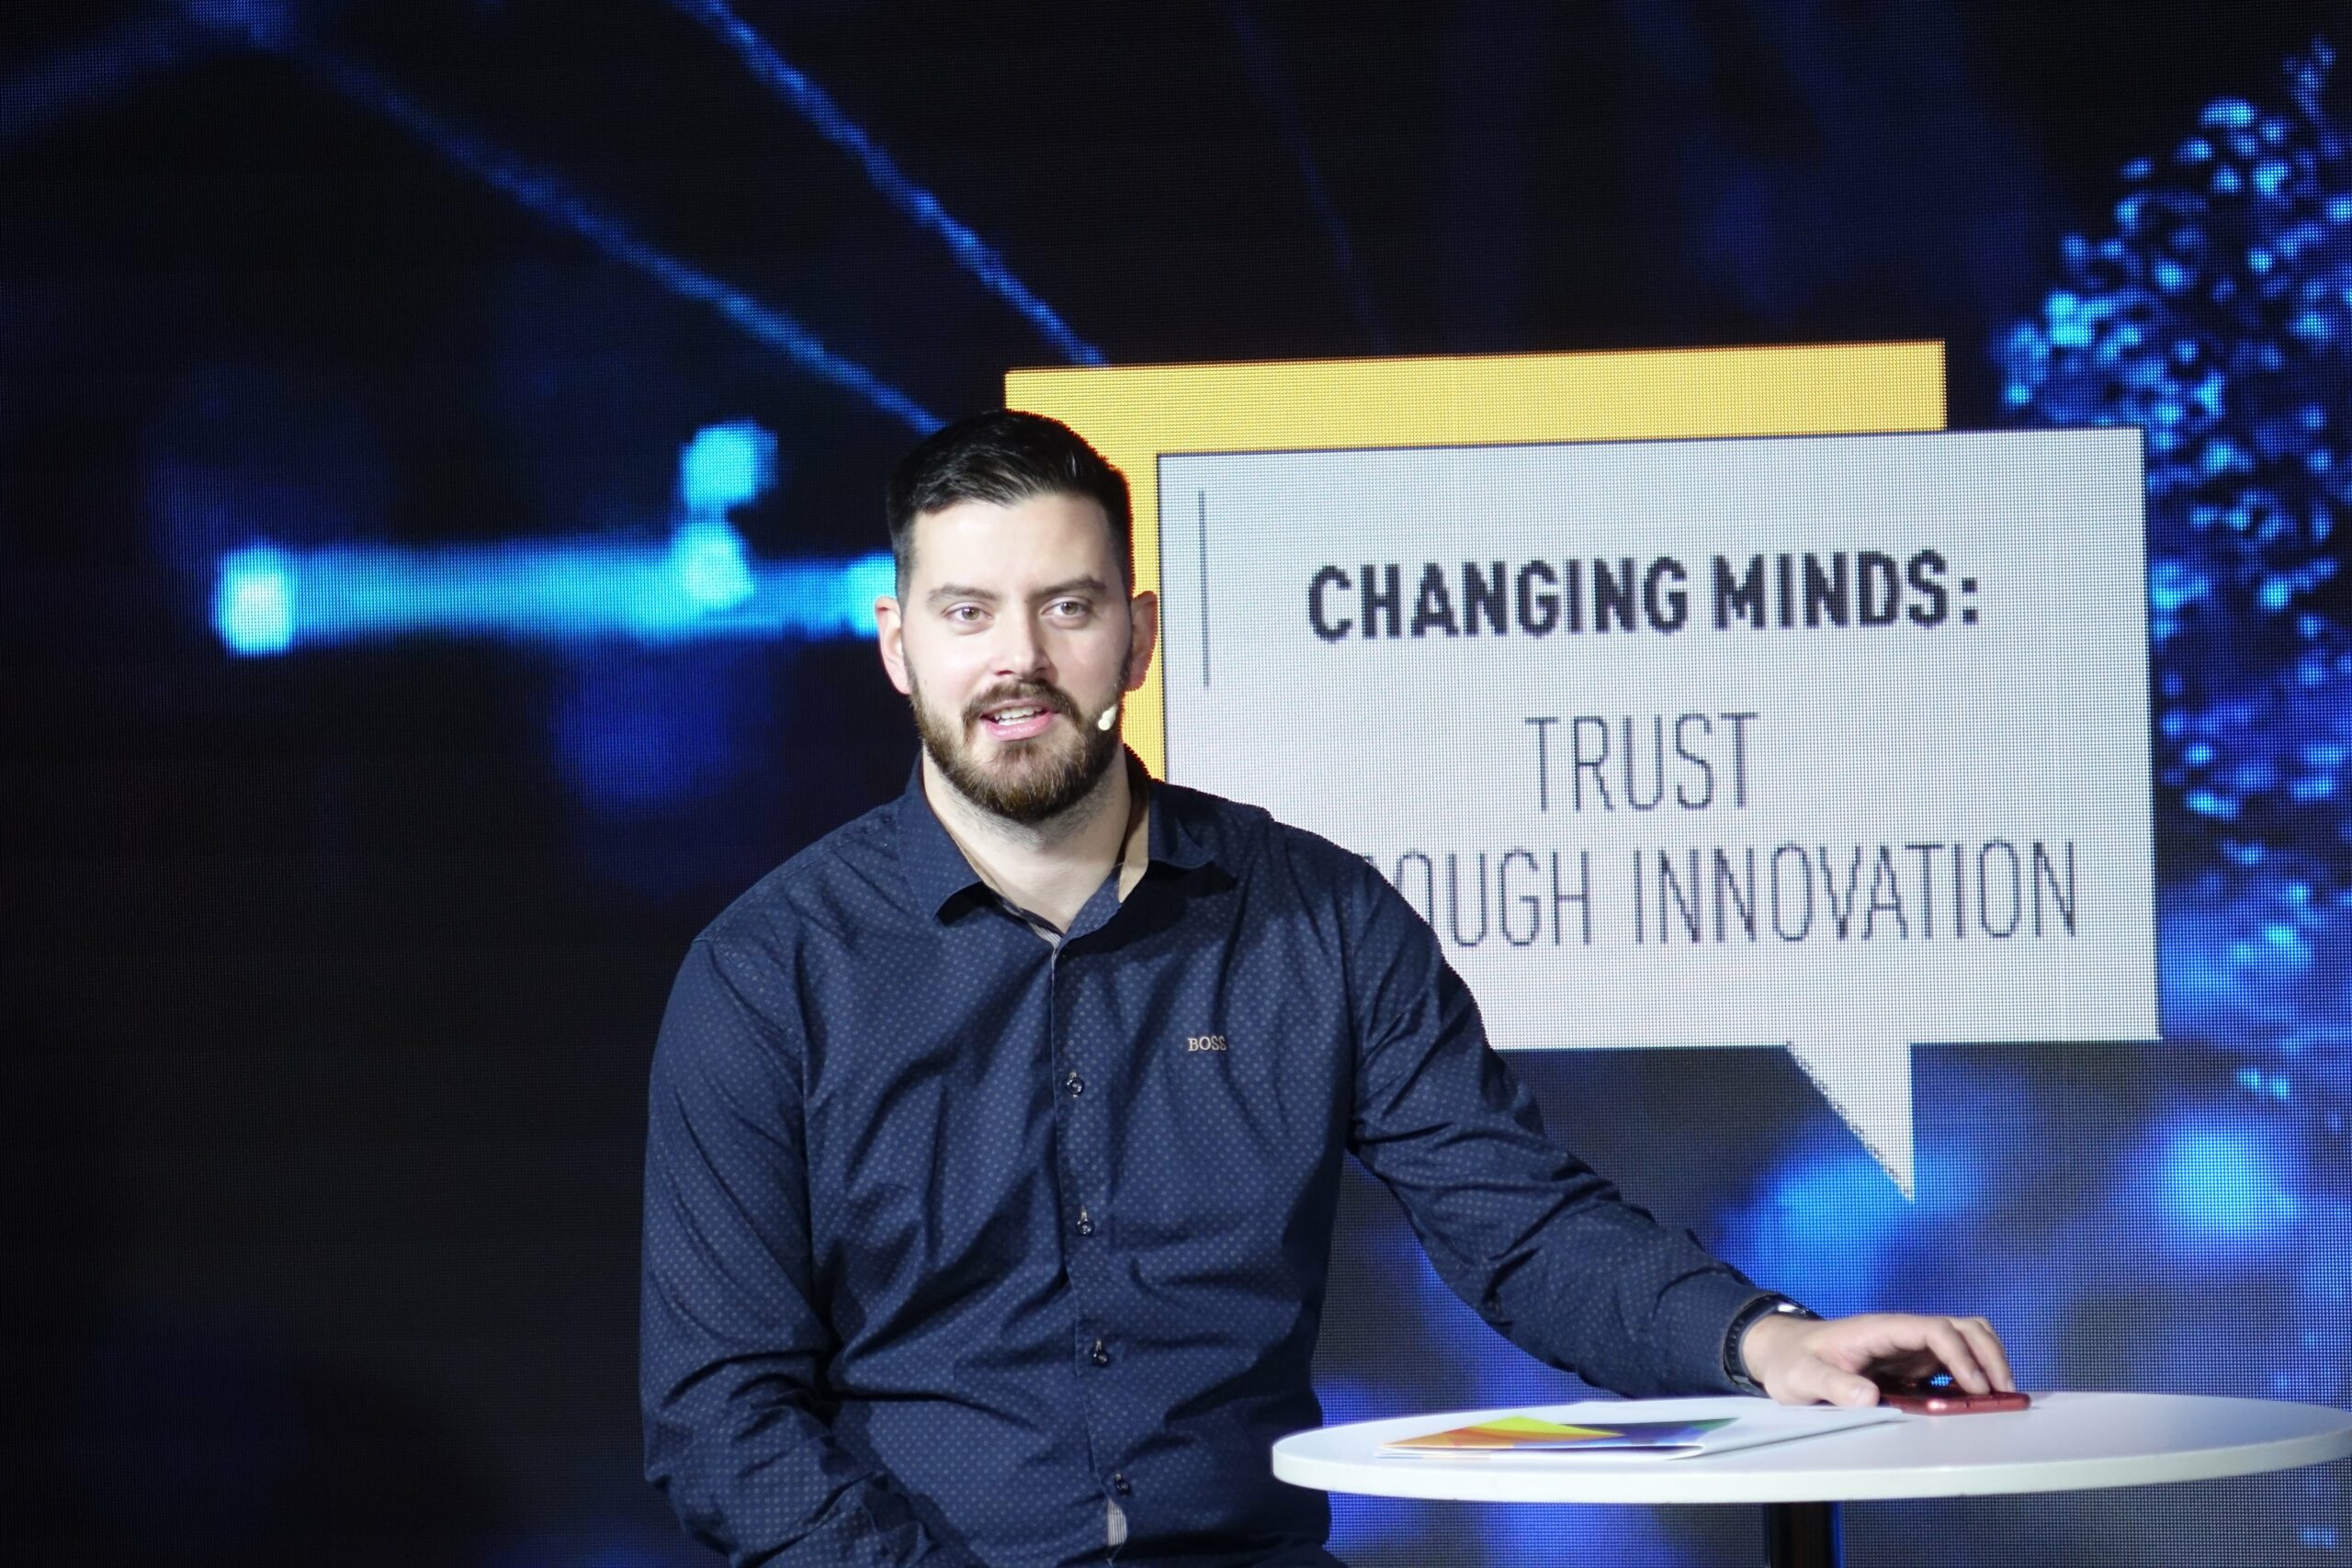 Serbia-Kosovo: Four years of changing minds and building trust through innovation